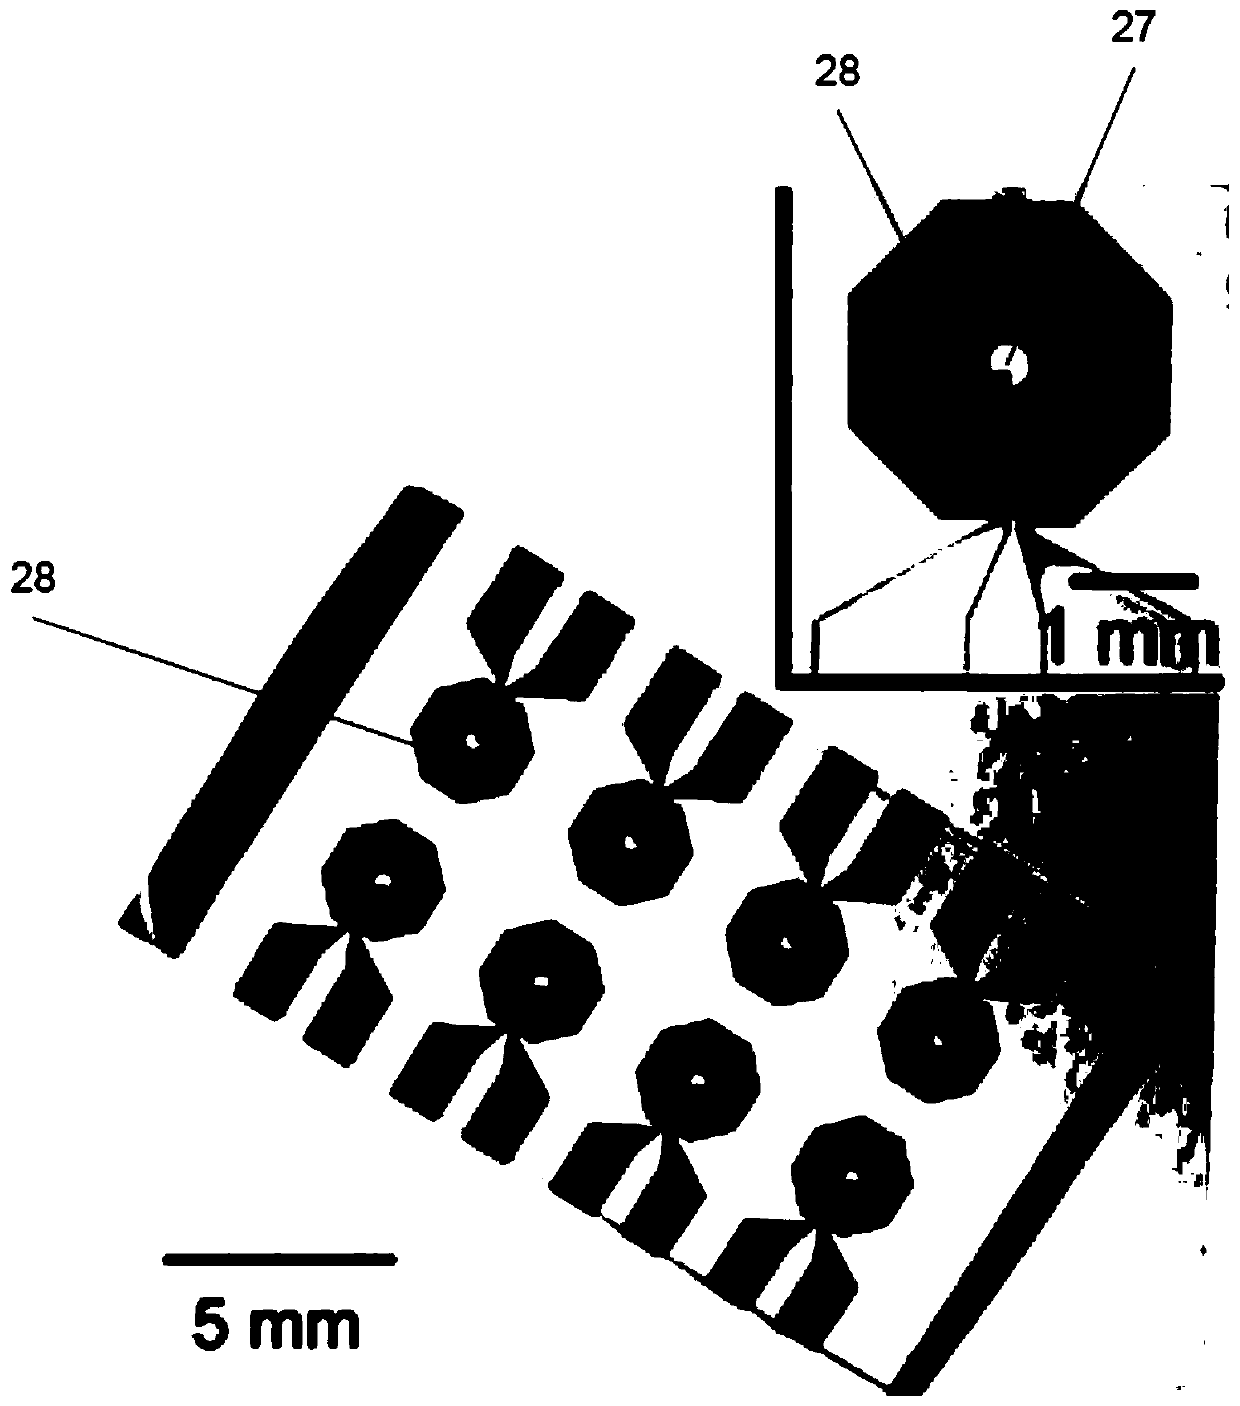 Detection of targets using magnetic resonance